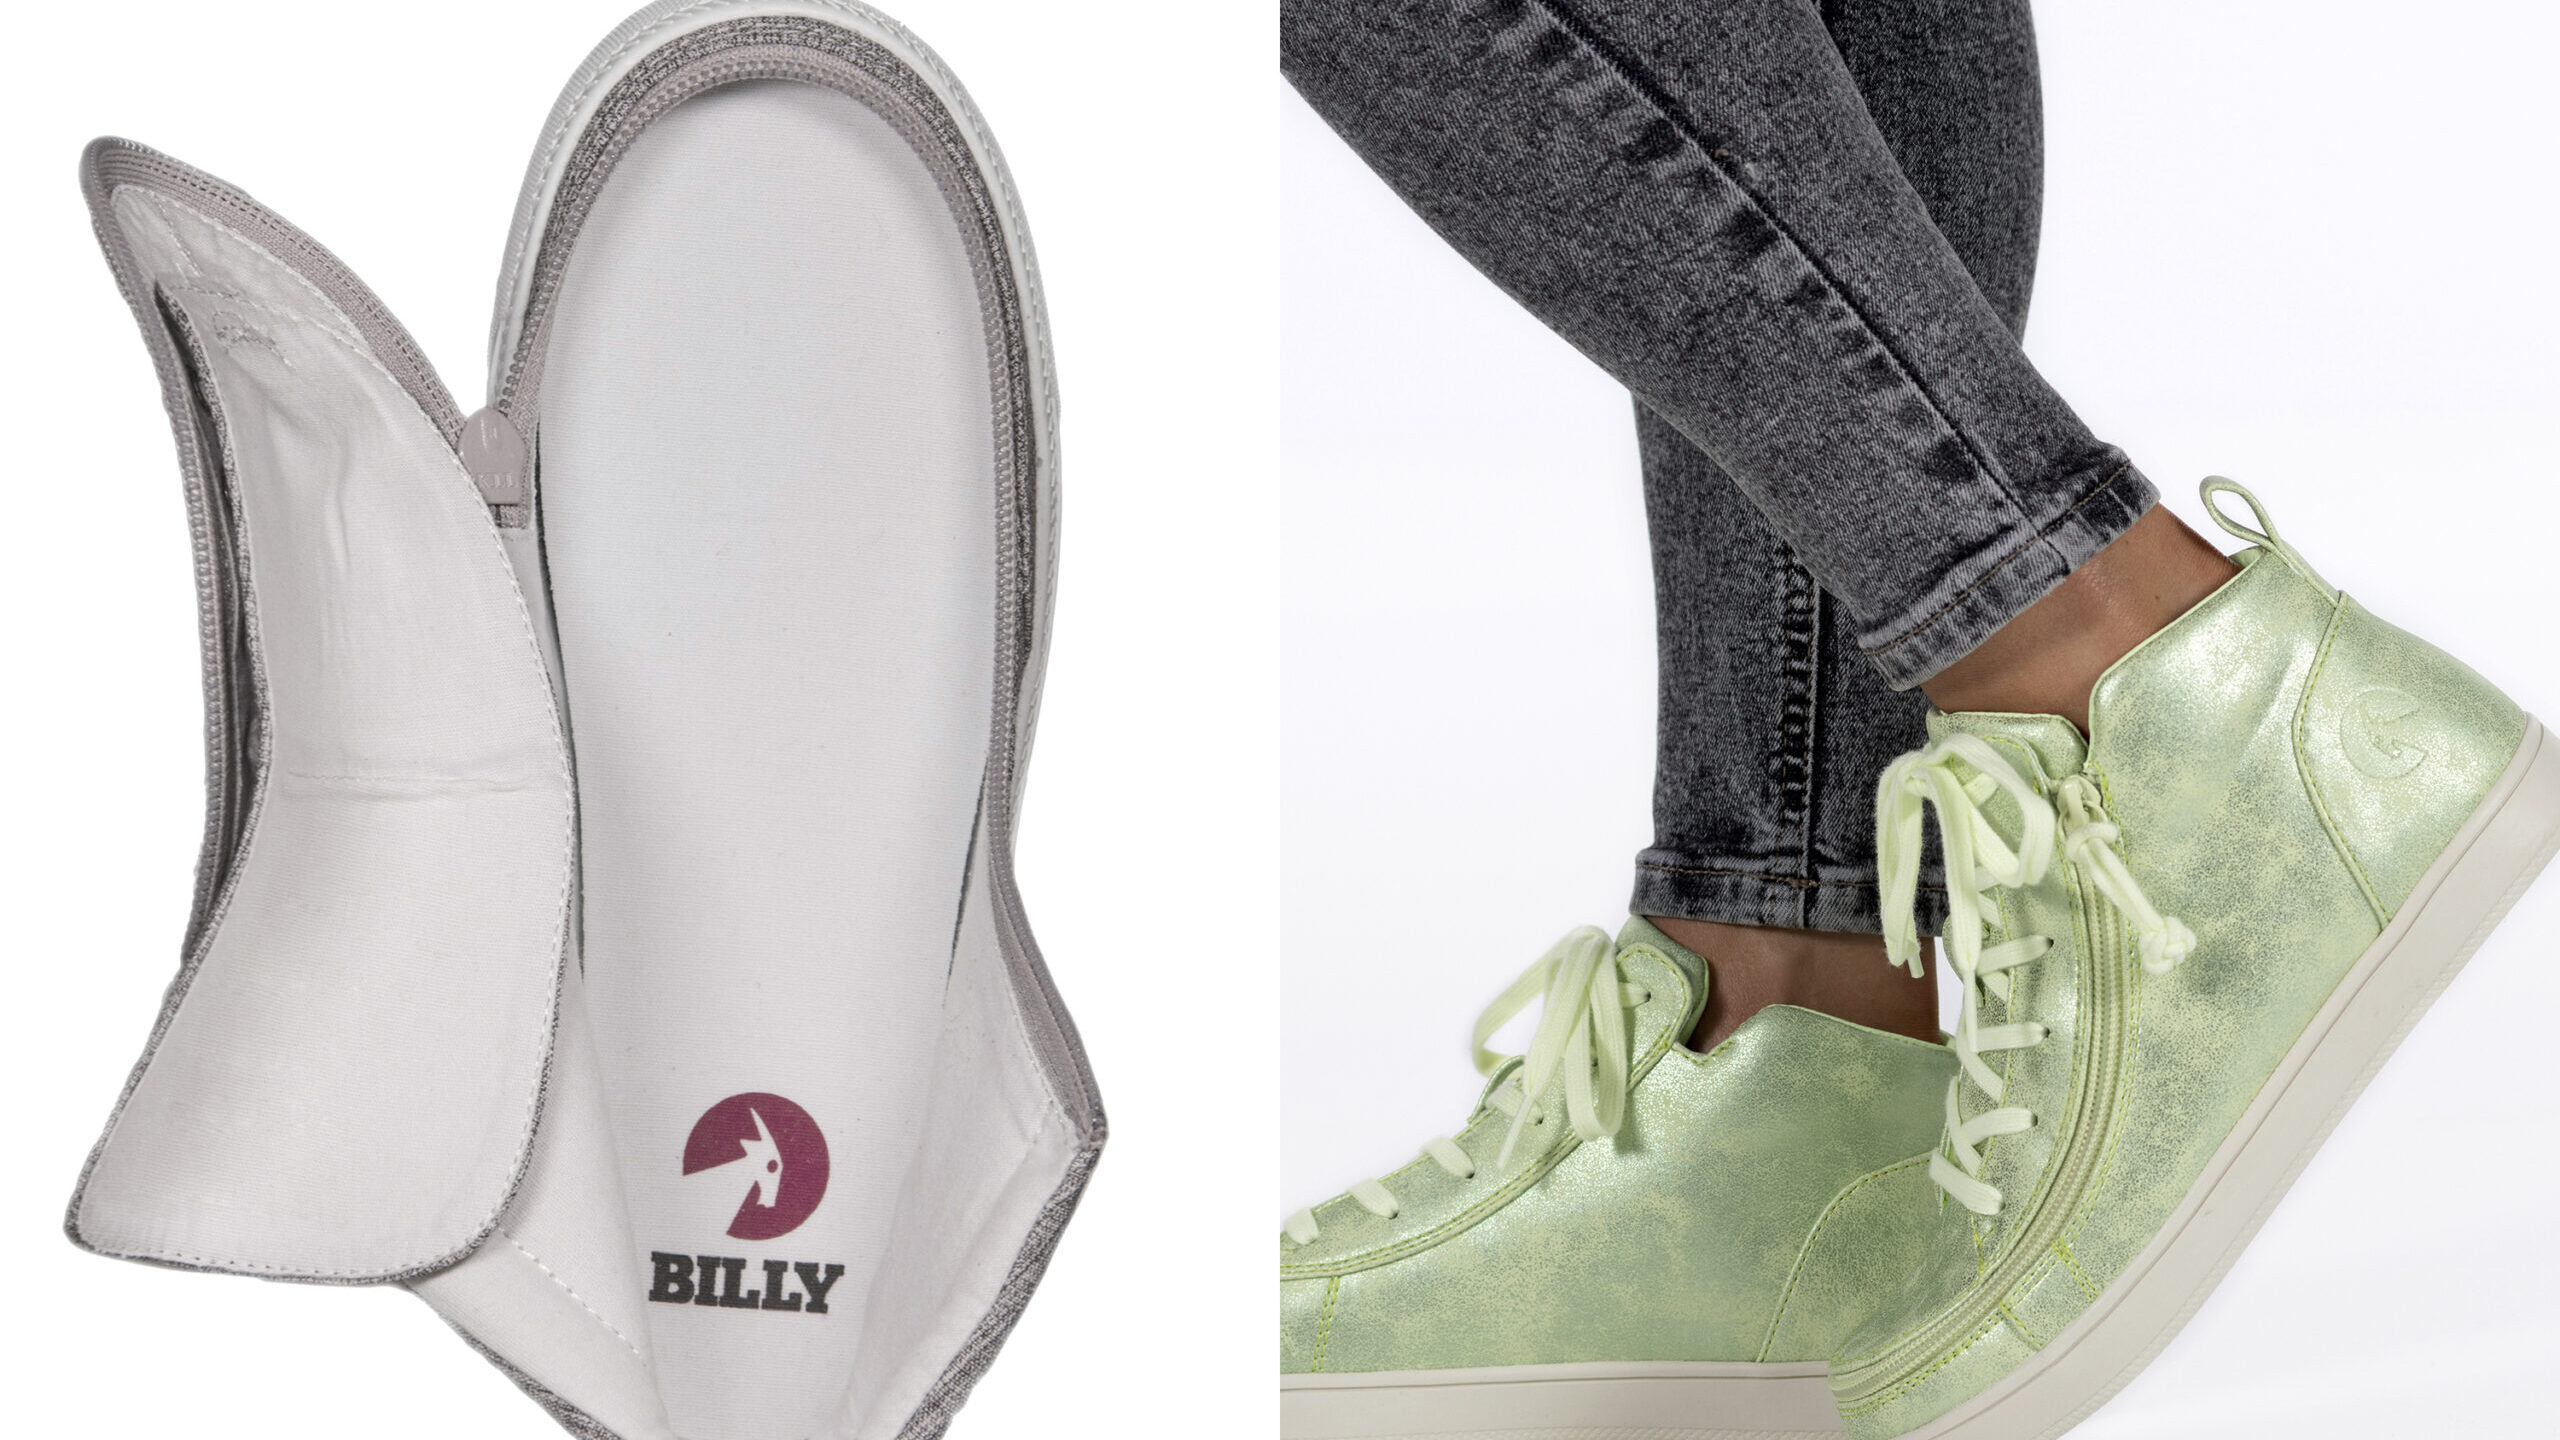 combination of photos show adaptive shoes by Billy Footwear....